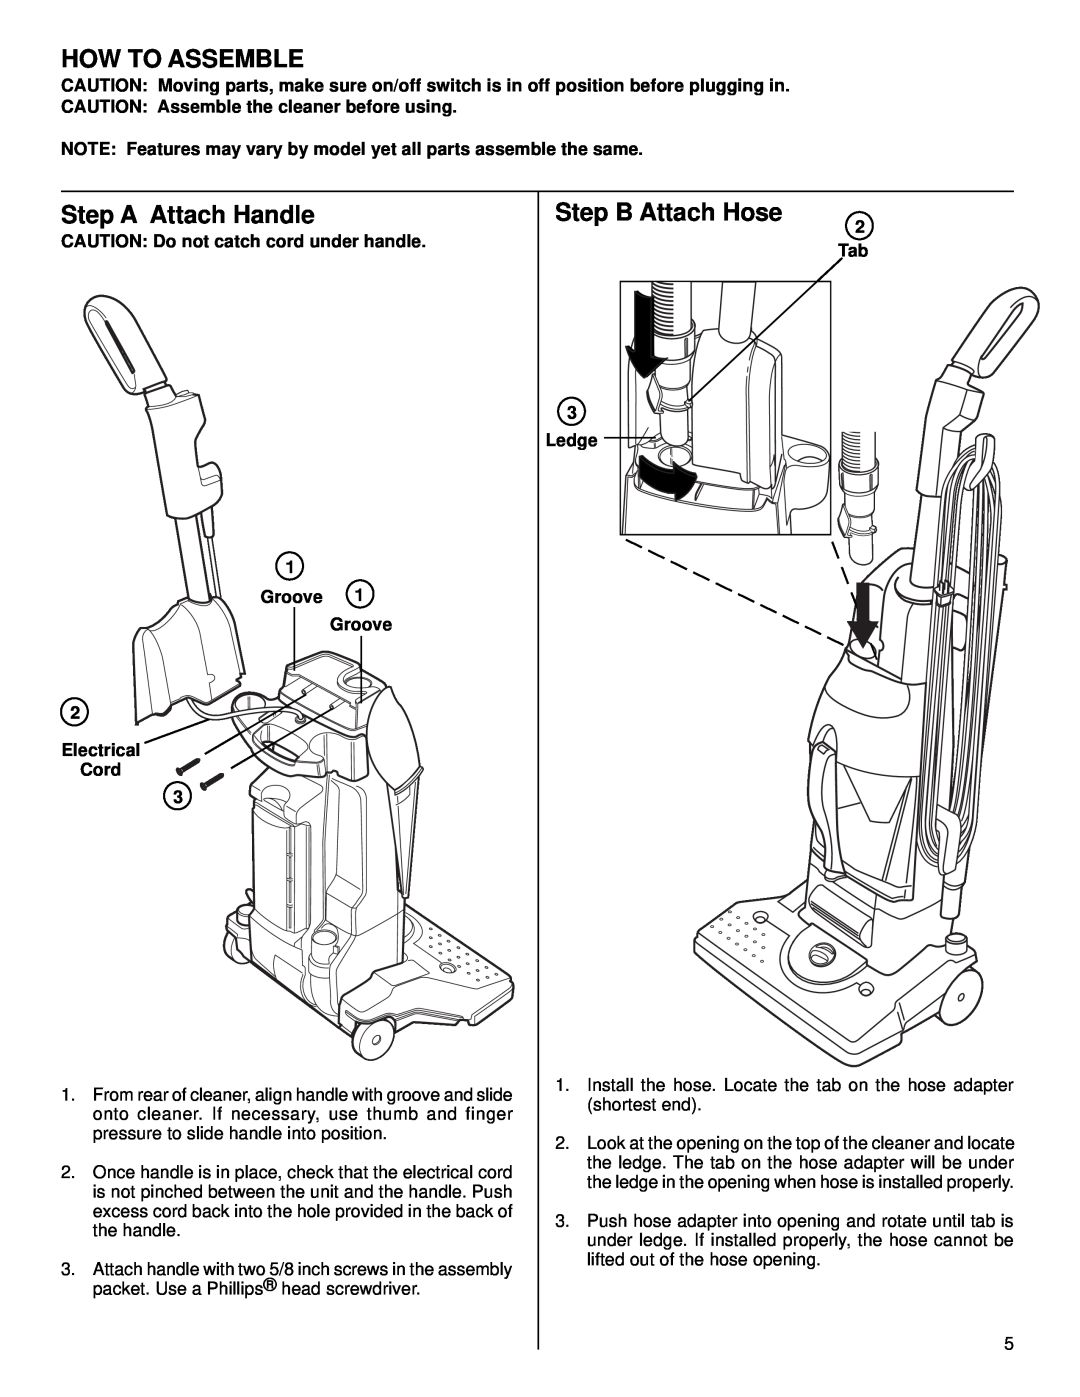 Eureka 4500 How To Assemble, Step A Attach Handle, Step B Attach Hose, CAUTION Assemble the cleaner before using, 2 Tab 